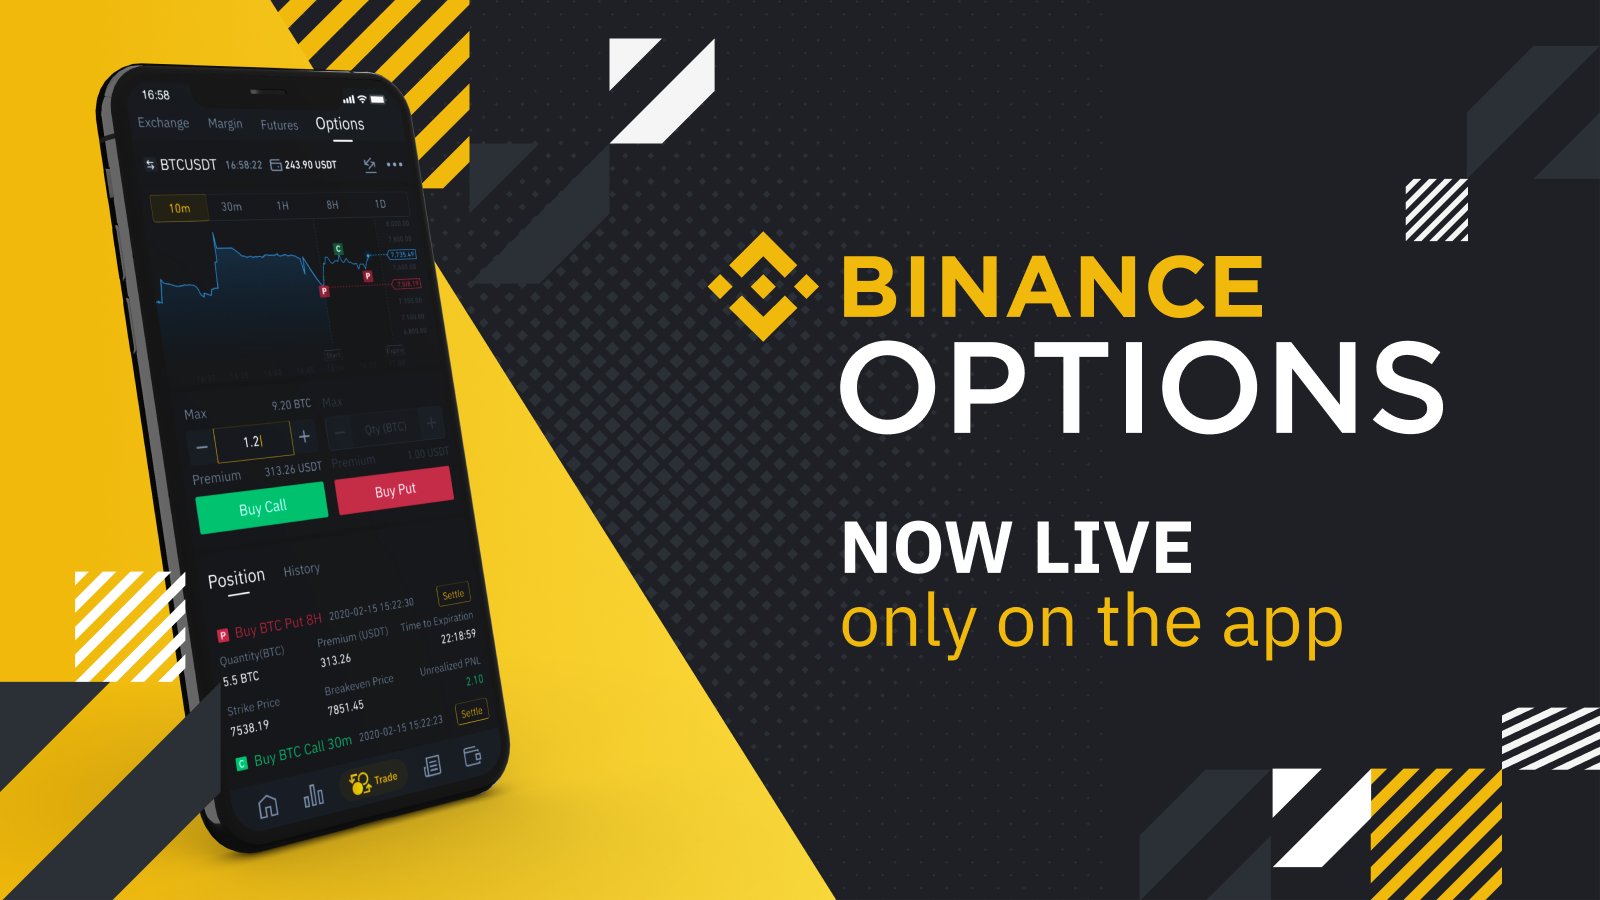 Binance Officially Launched Bitcoin Trading Via Mobile App ...